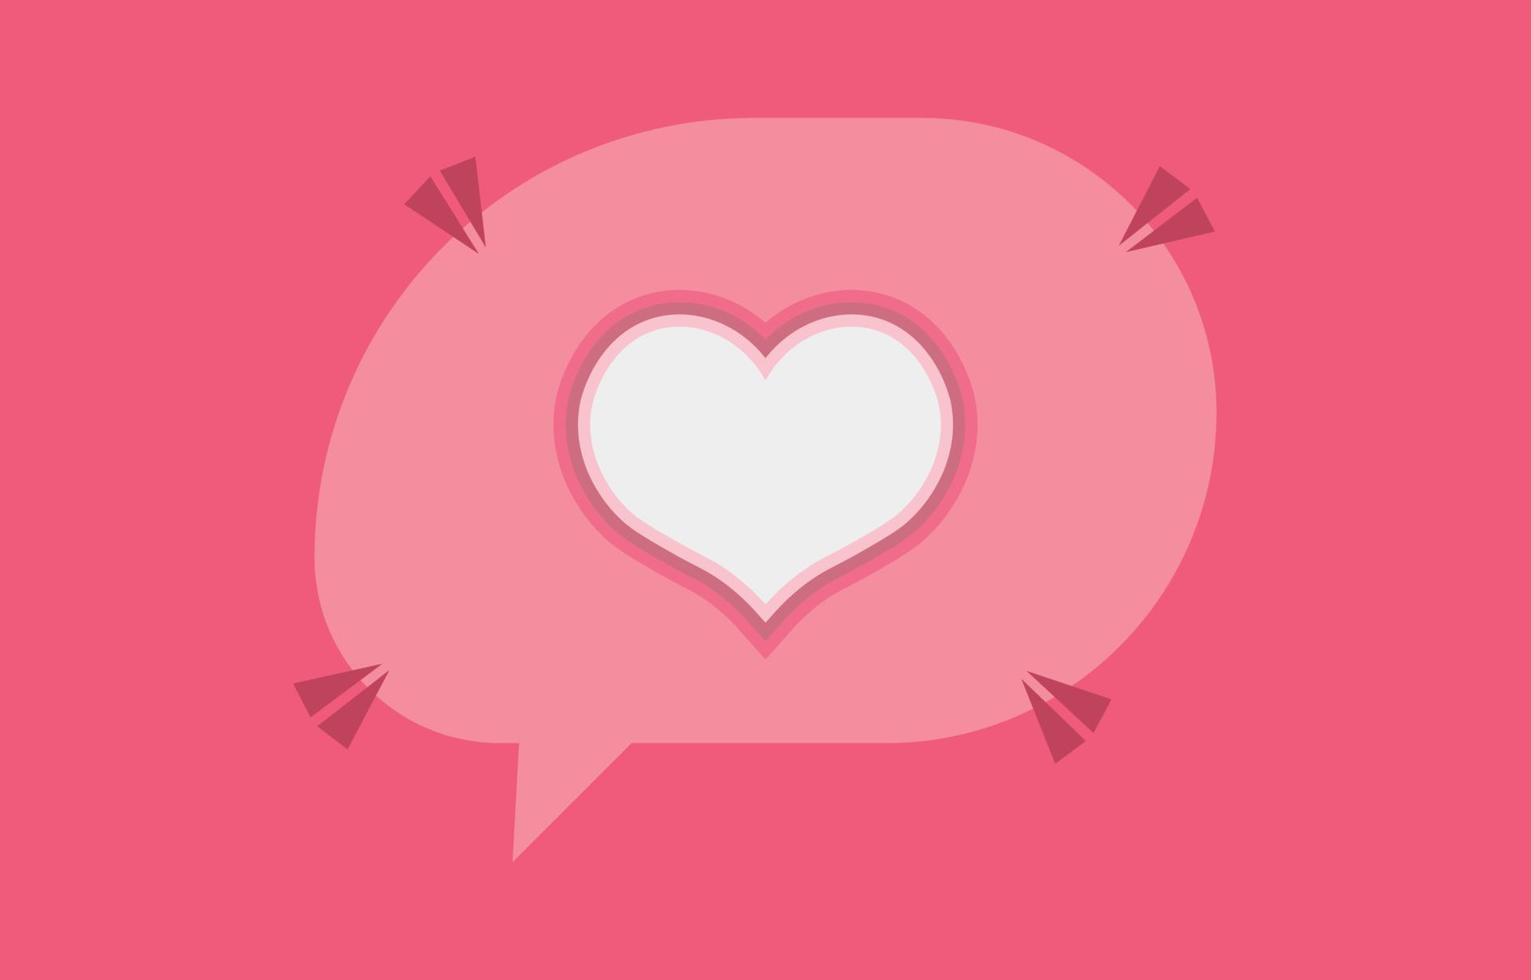 Valentine's day speech bubbles. Show a heart shape in sweet colors. The concept of sending love through messages. social media chat couple on pink background vector